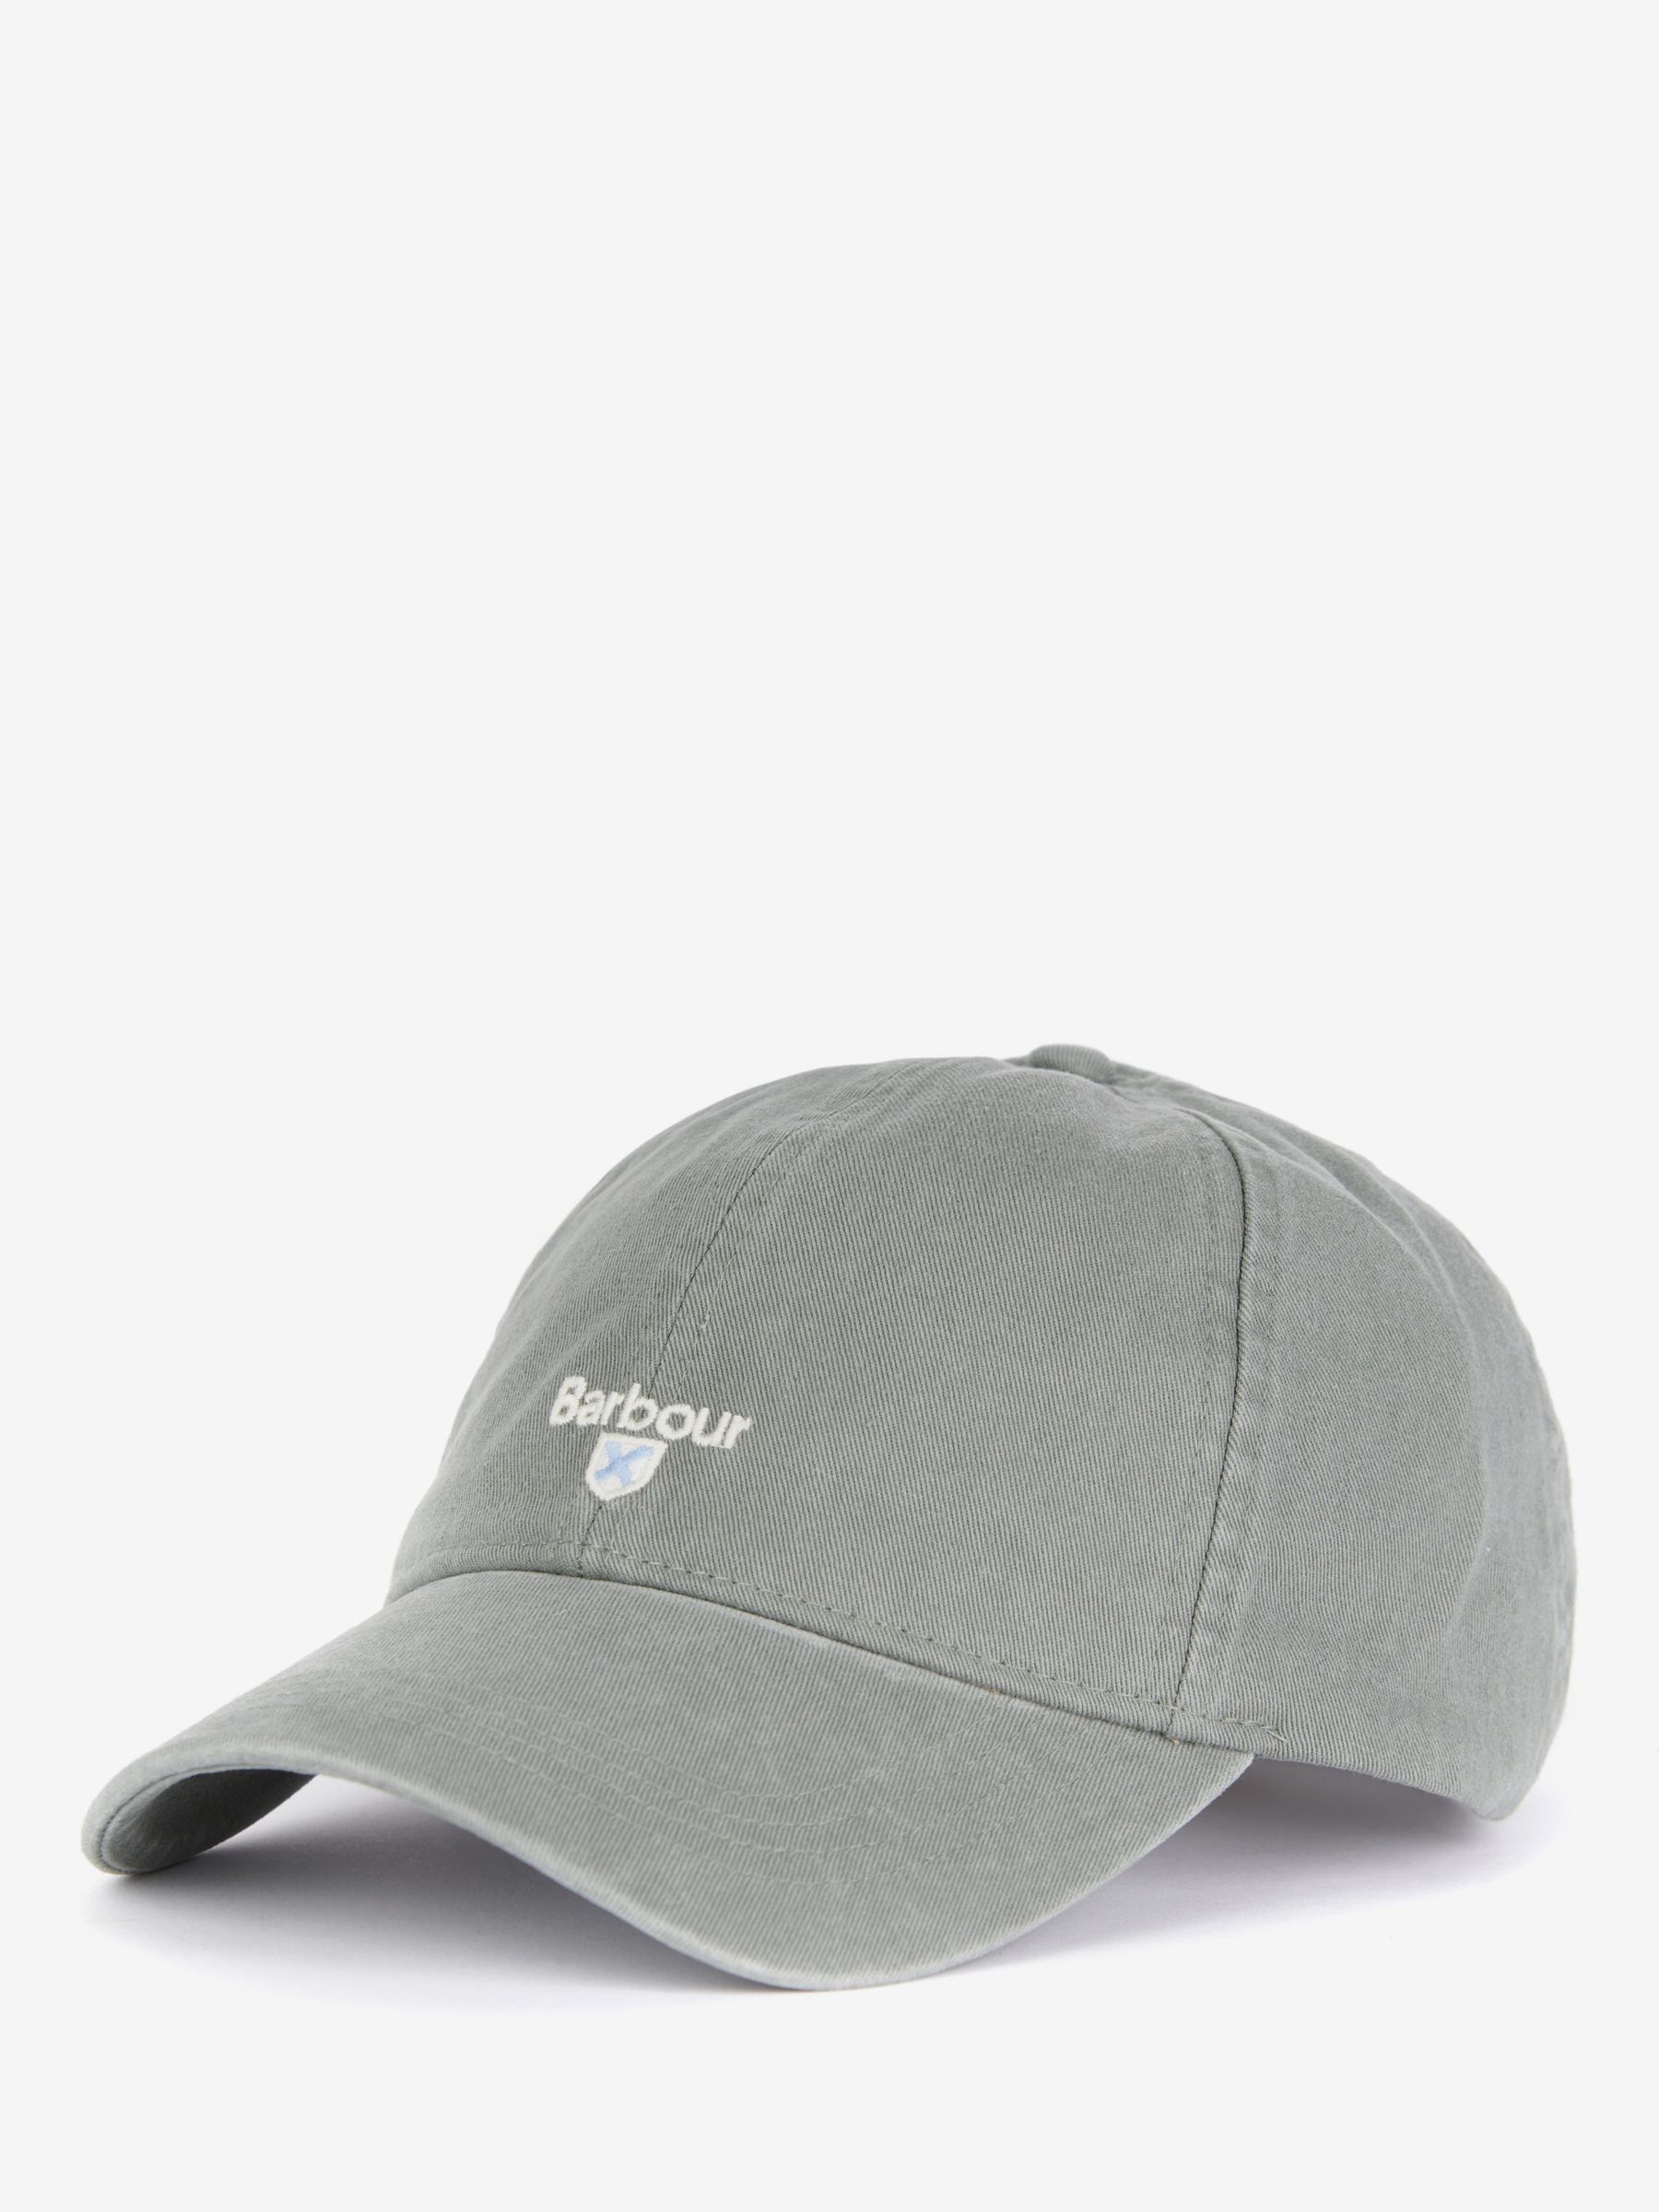 Barbour Cascade Sports Cap, Agave Green at John Lewis & Partners